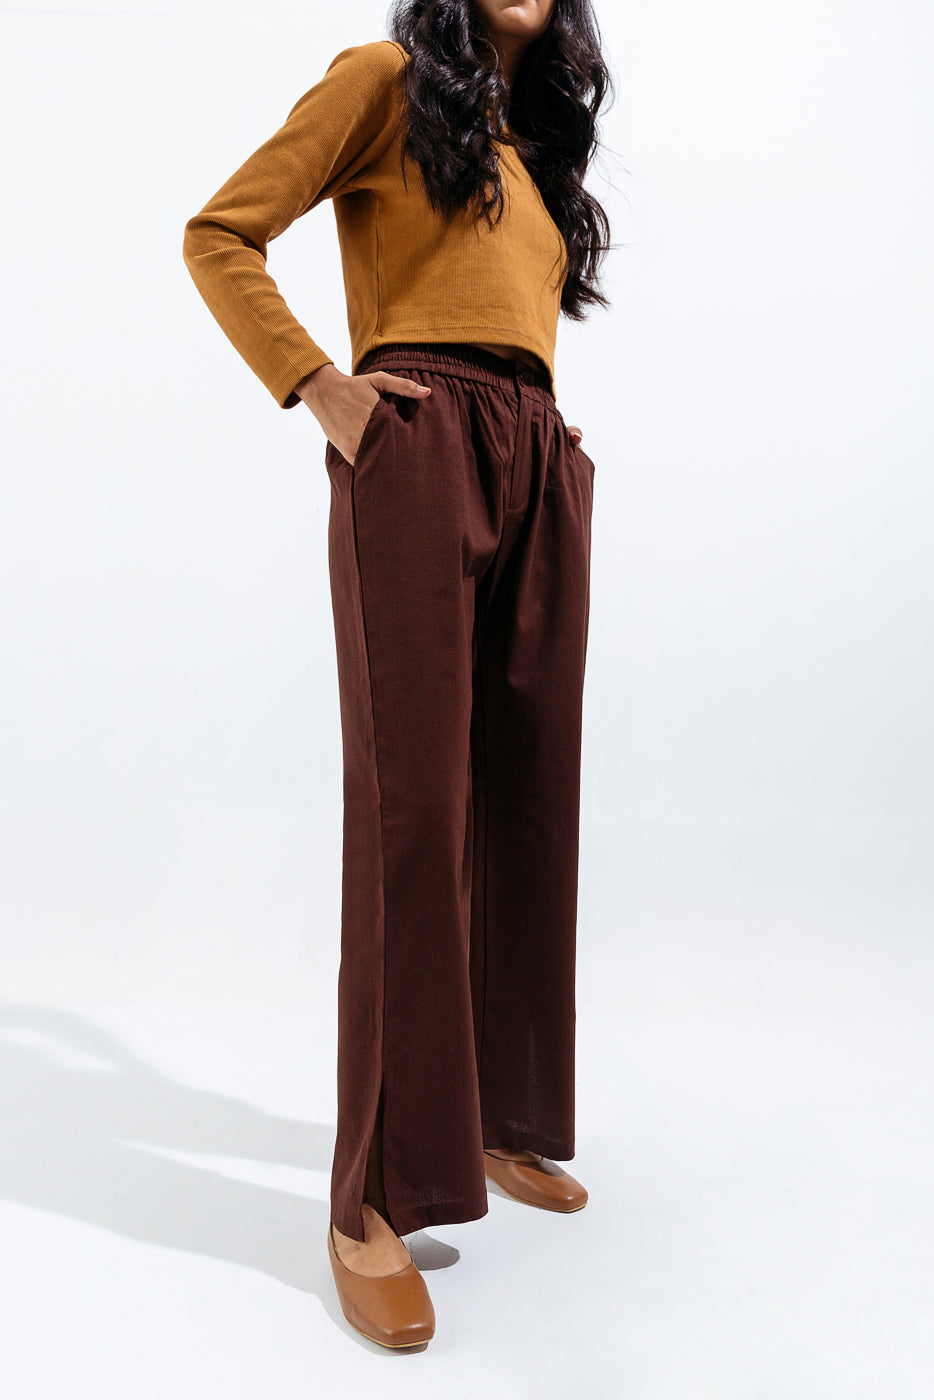 JUCHENG Retro Straight Wide Leg Brown Pants Vintage Female Korean High  Waist Casual Long Navy Blue Pants White Beige Trousers : Amazon.ca:  Clothing, Shoes & Accessories